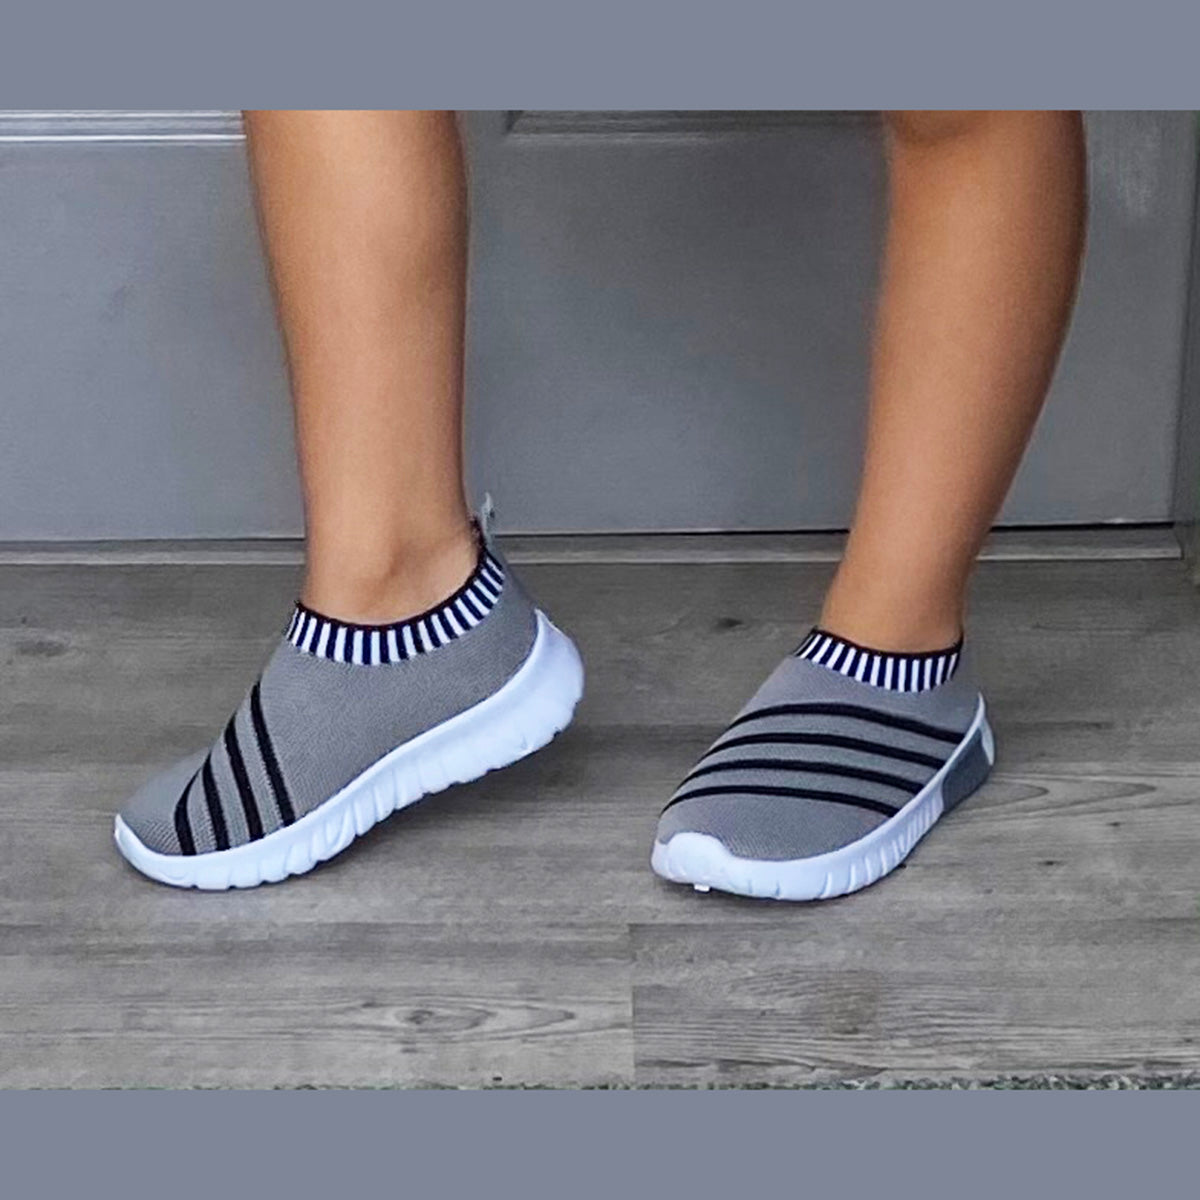 Childrens Latest style fabric striped trainers